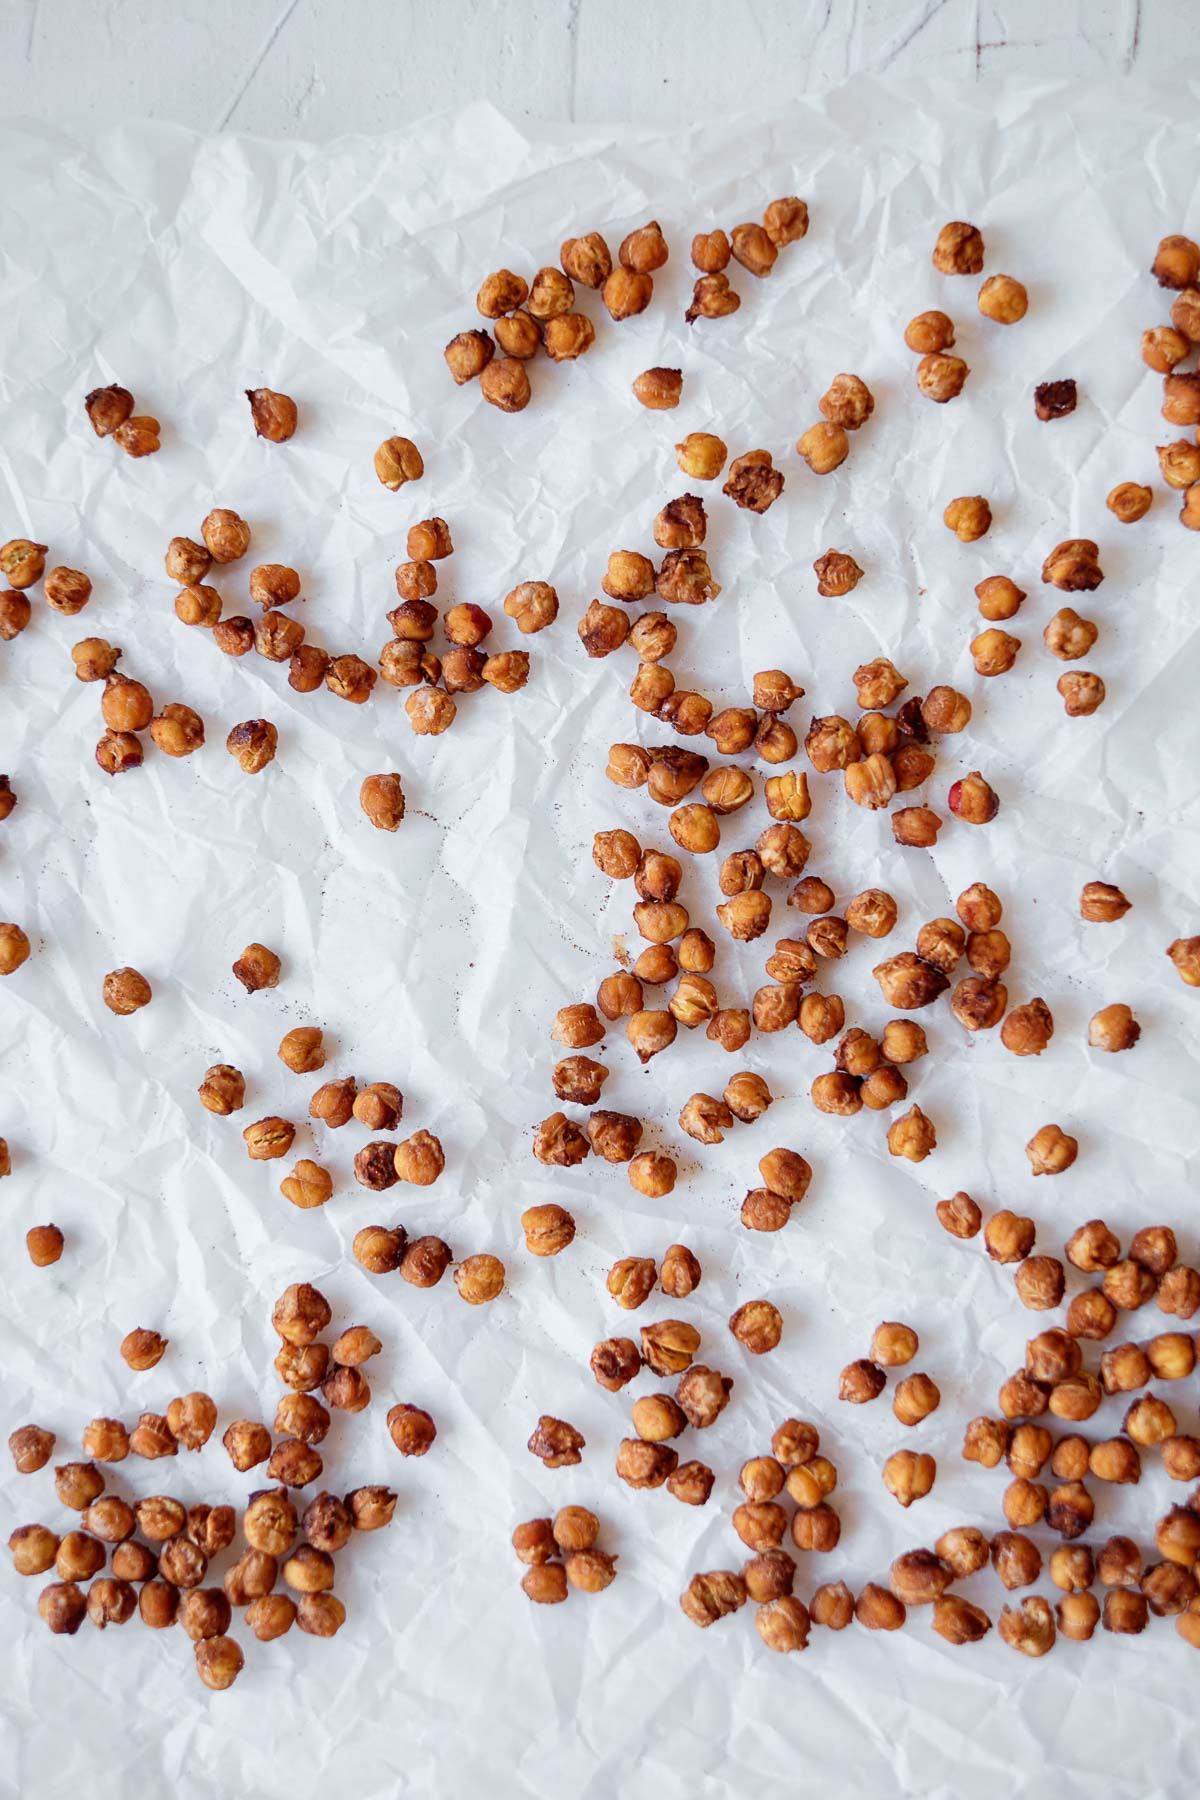 roasted chickpeas spread out on white parchment paper